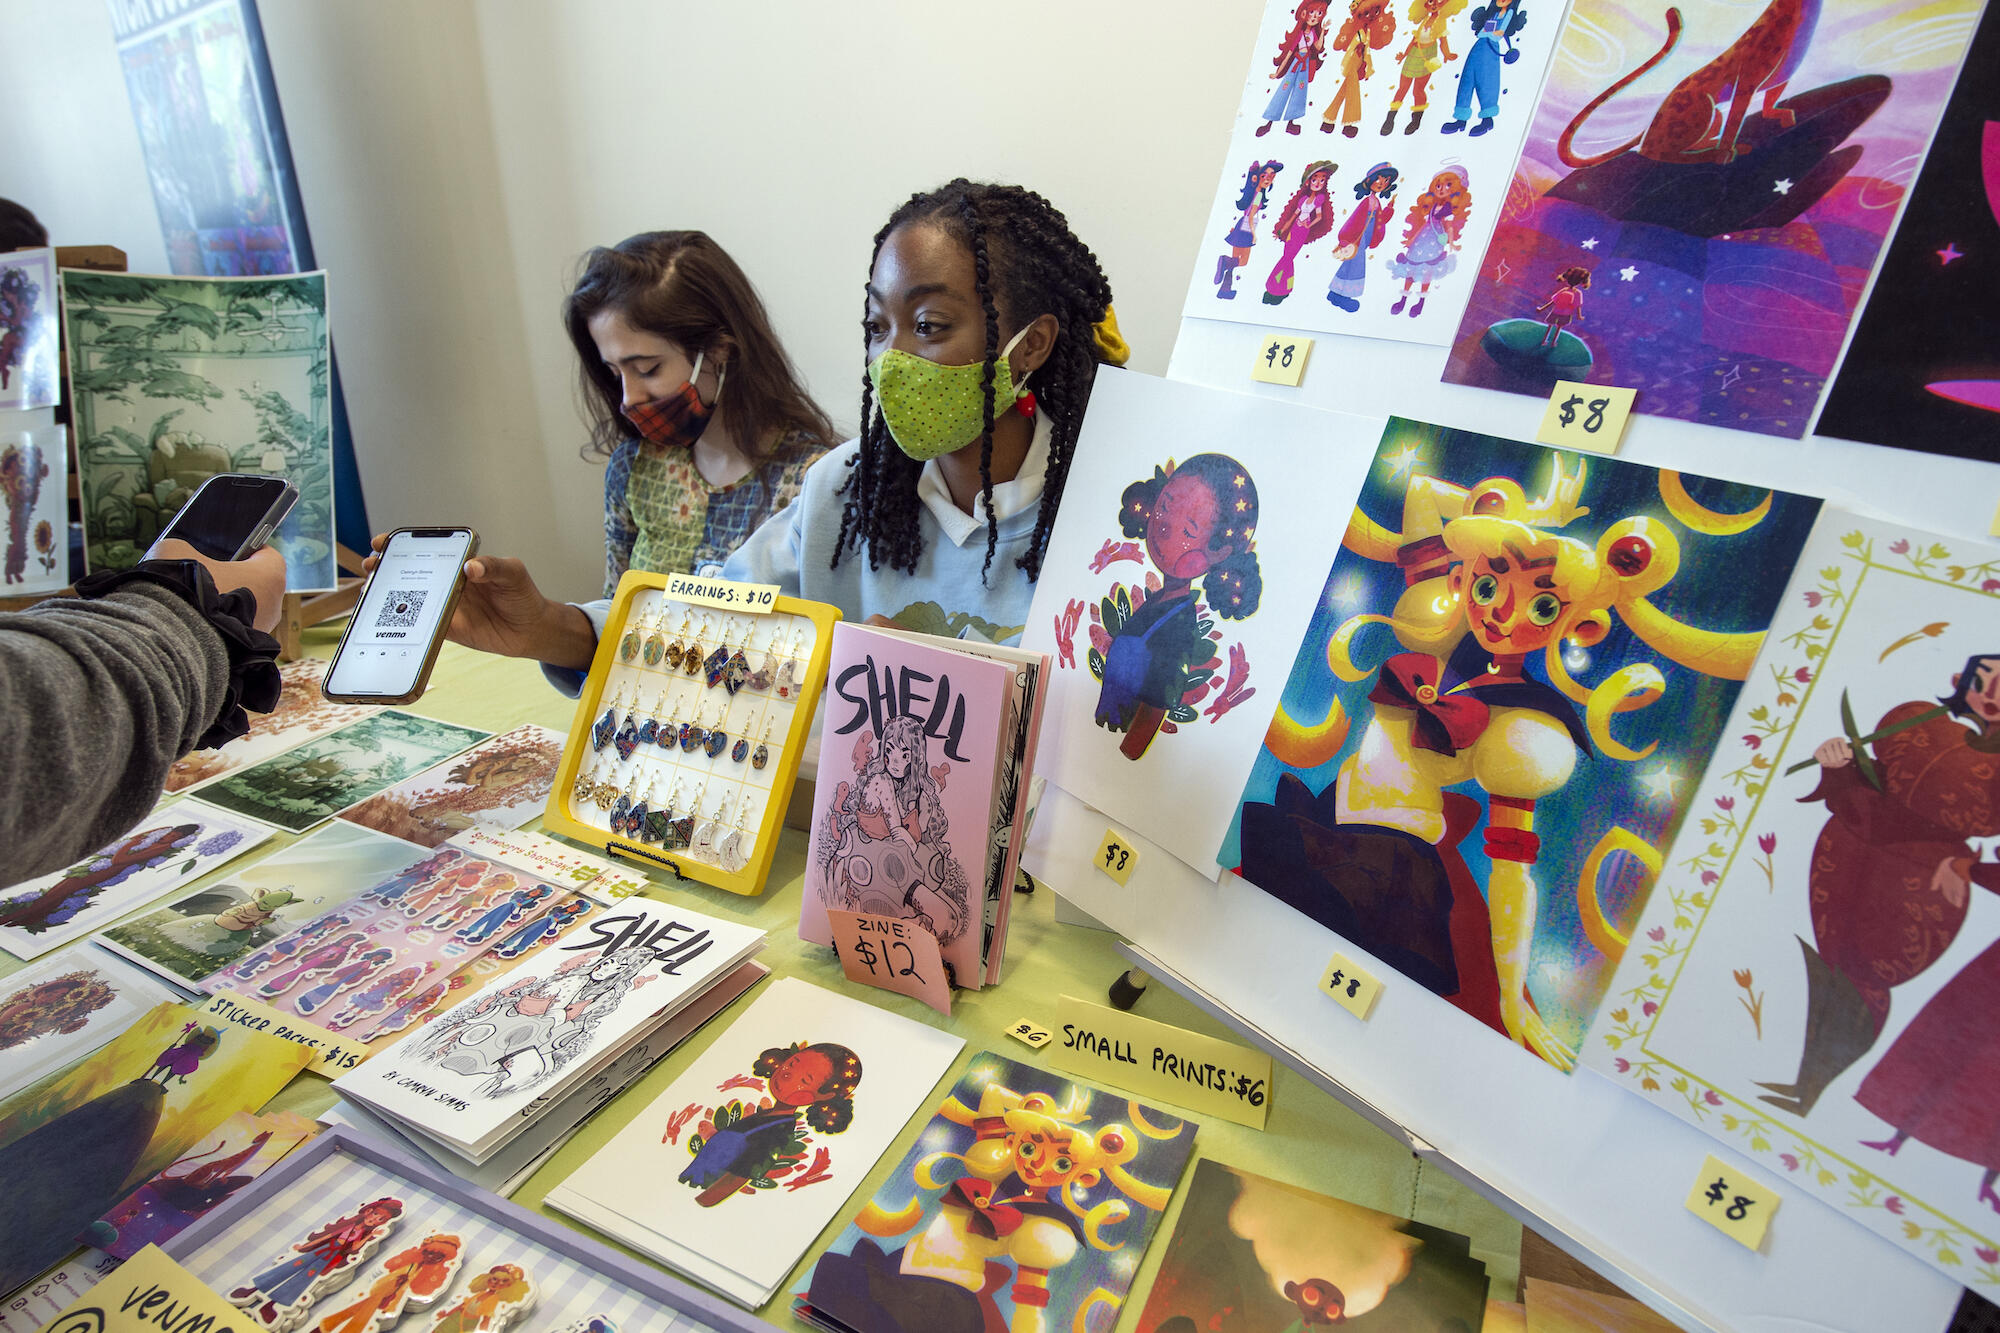 VCU graduates Camryn Simms (right) and Lillian Trenton display and sell their artwork at the Richmond Indie Comic Expo.